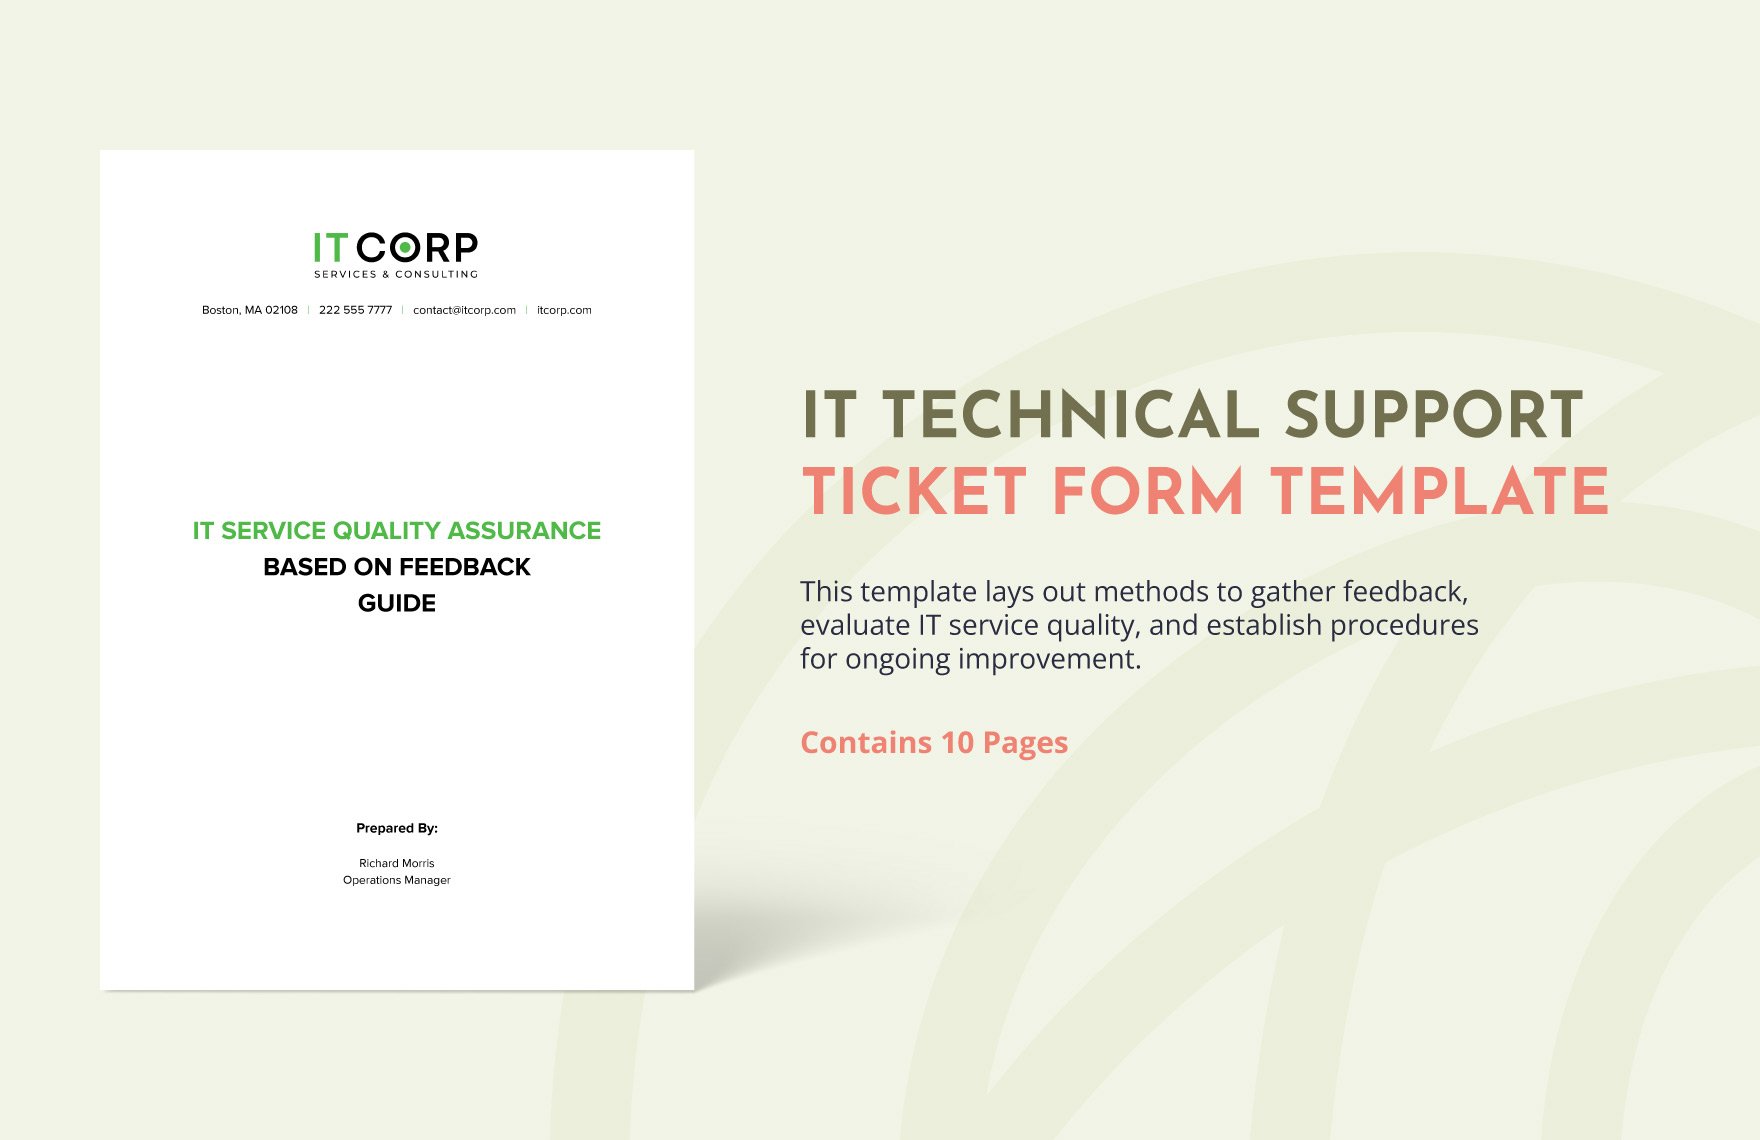 IT Service Quality Assurance based on Feedback Guide Template